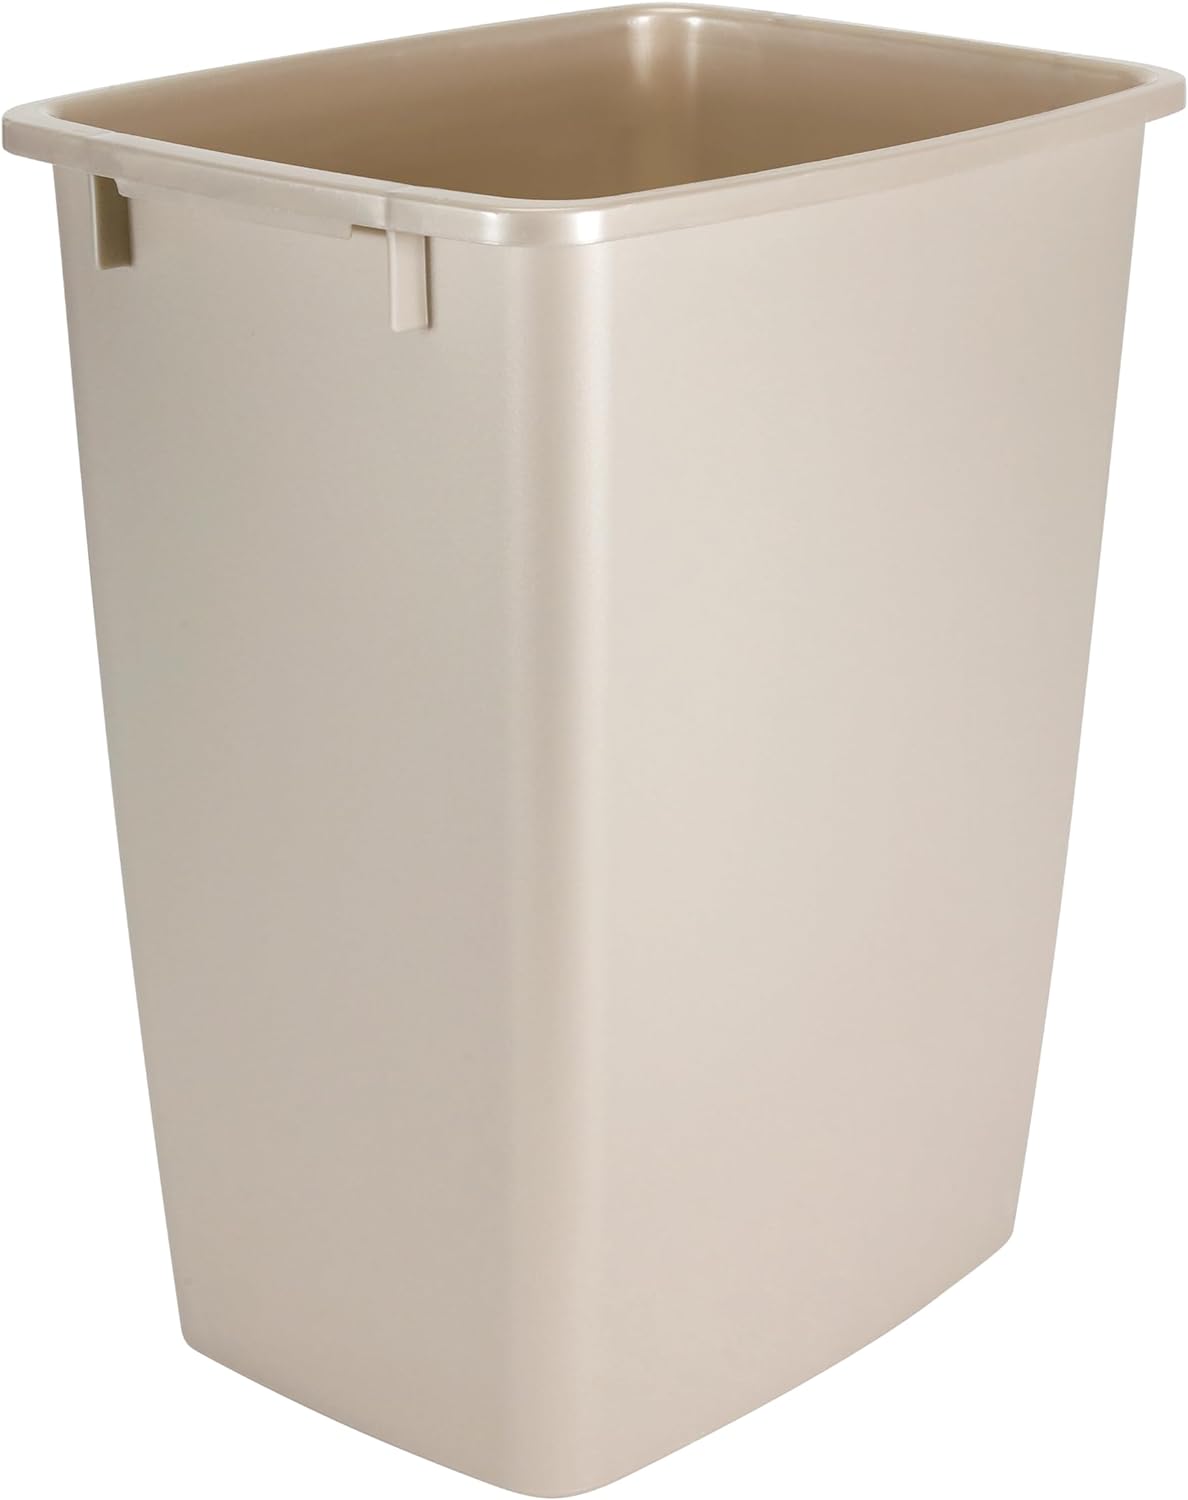 Small Trash  9-Gallons, Beige, Plastic Garbage Can/Wastebasket for Kitchen/Bathroom fits Under-